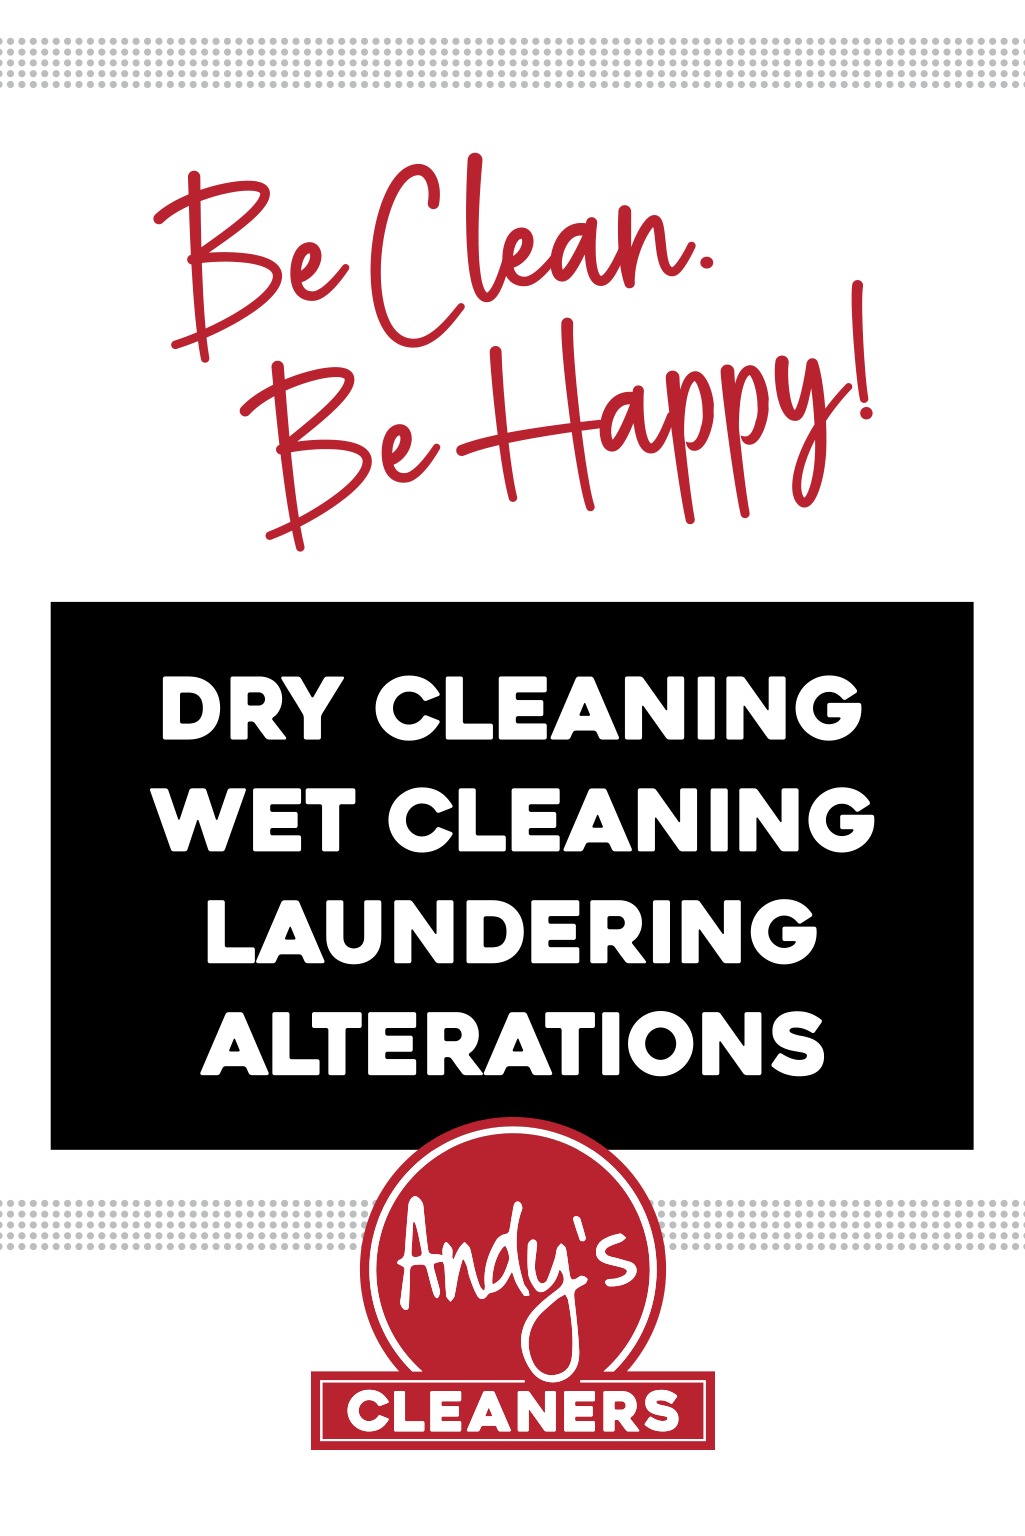 Be Clean Be Happy - Dry cleaning, wet cleaning, laundering, alterations